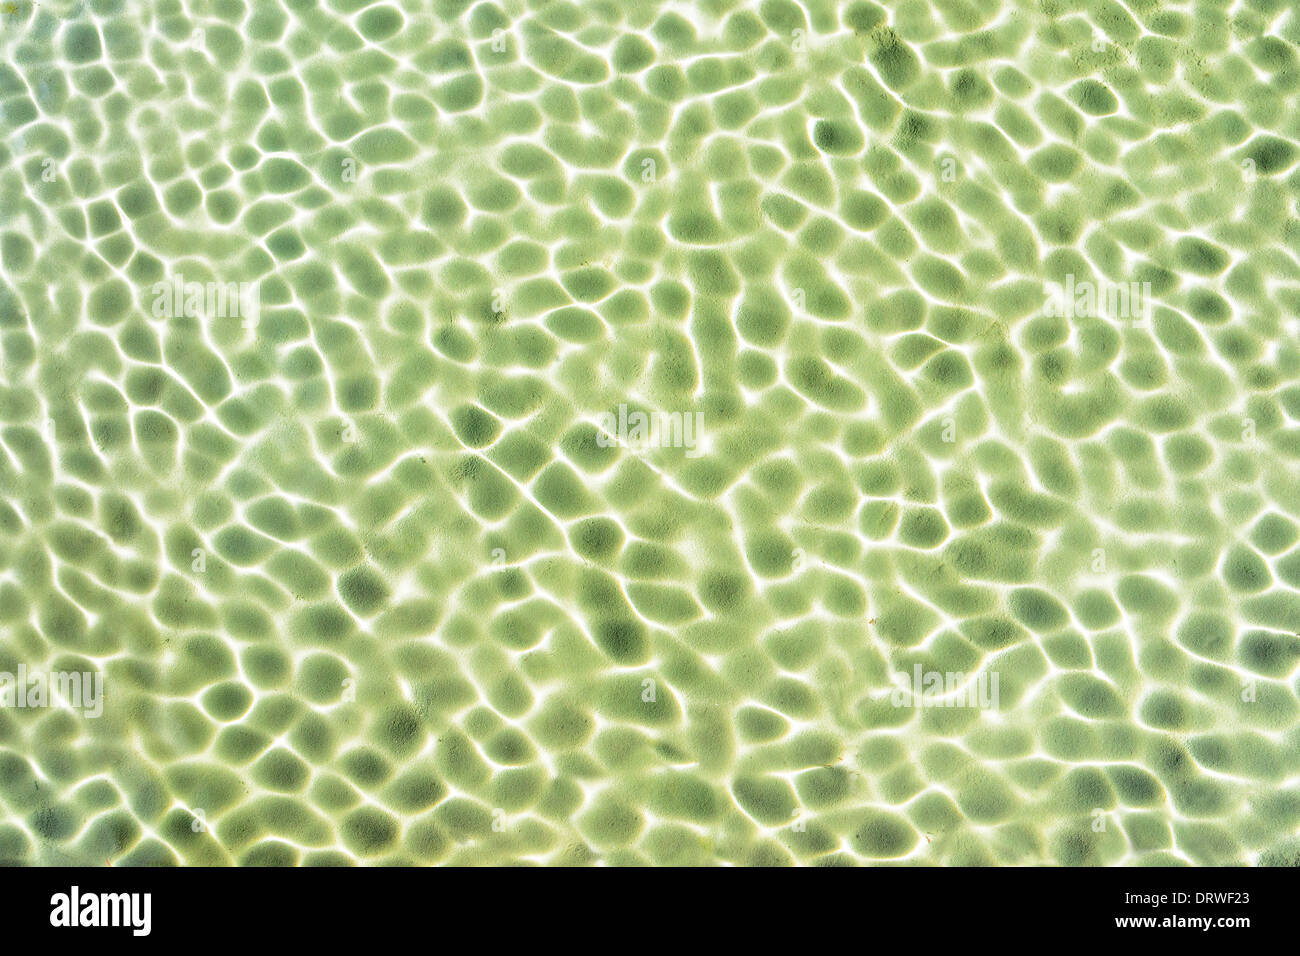 background of water ripples textures on a pond Stock Photo